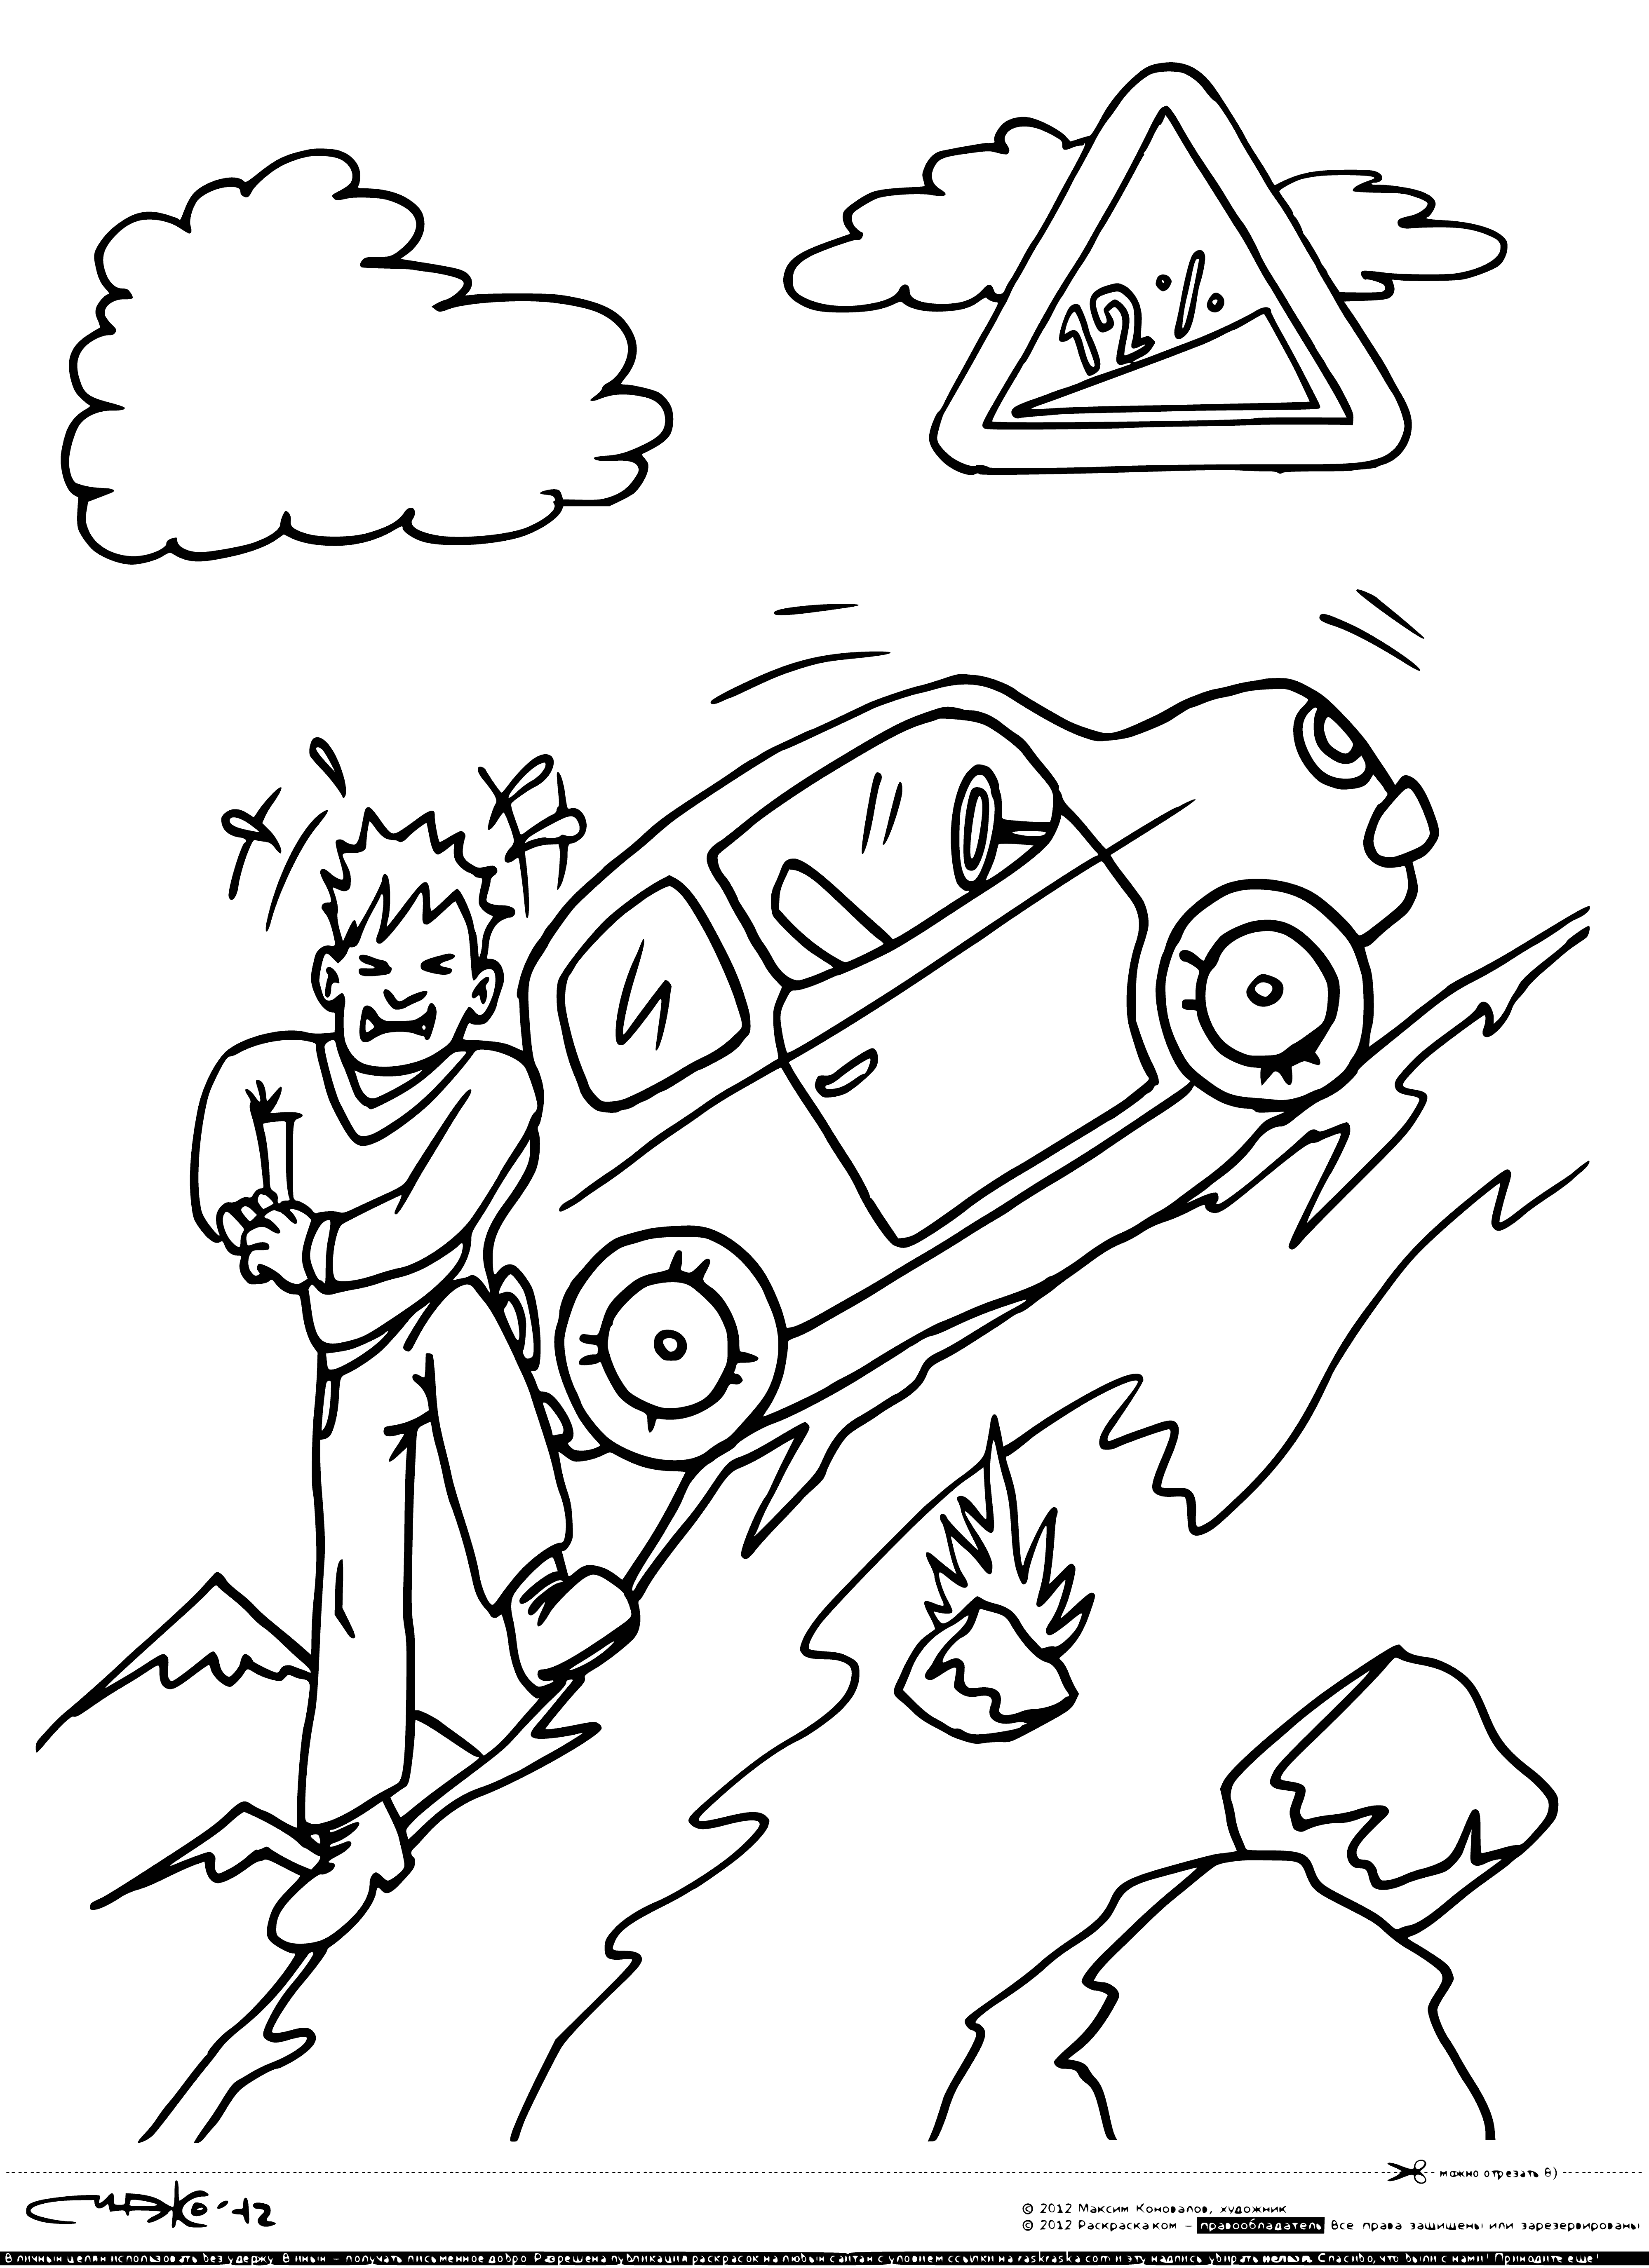 coloring page: Triangle w/ exclamation mark= steep climb ahead; drivers should exercise caution! #DriveSafe